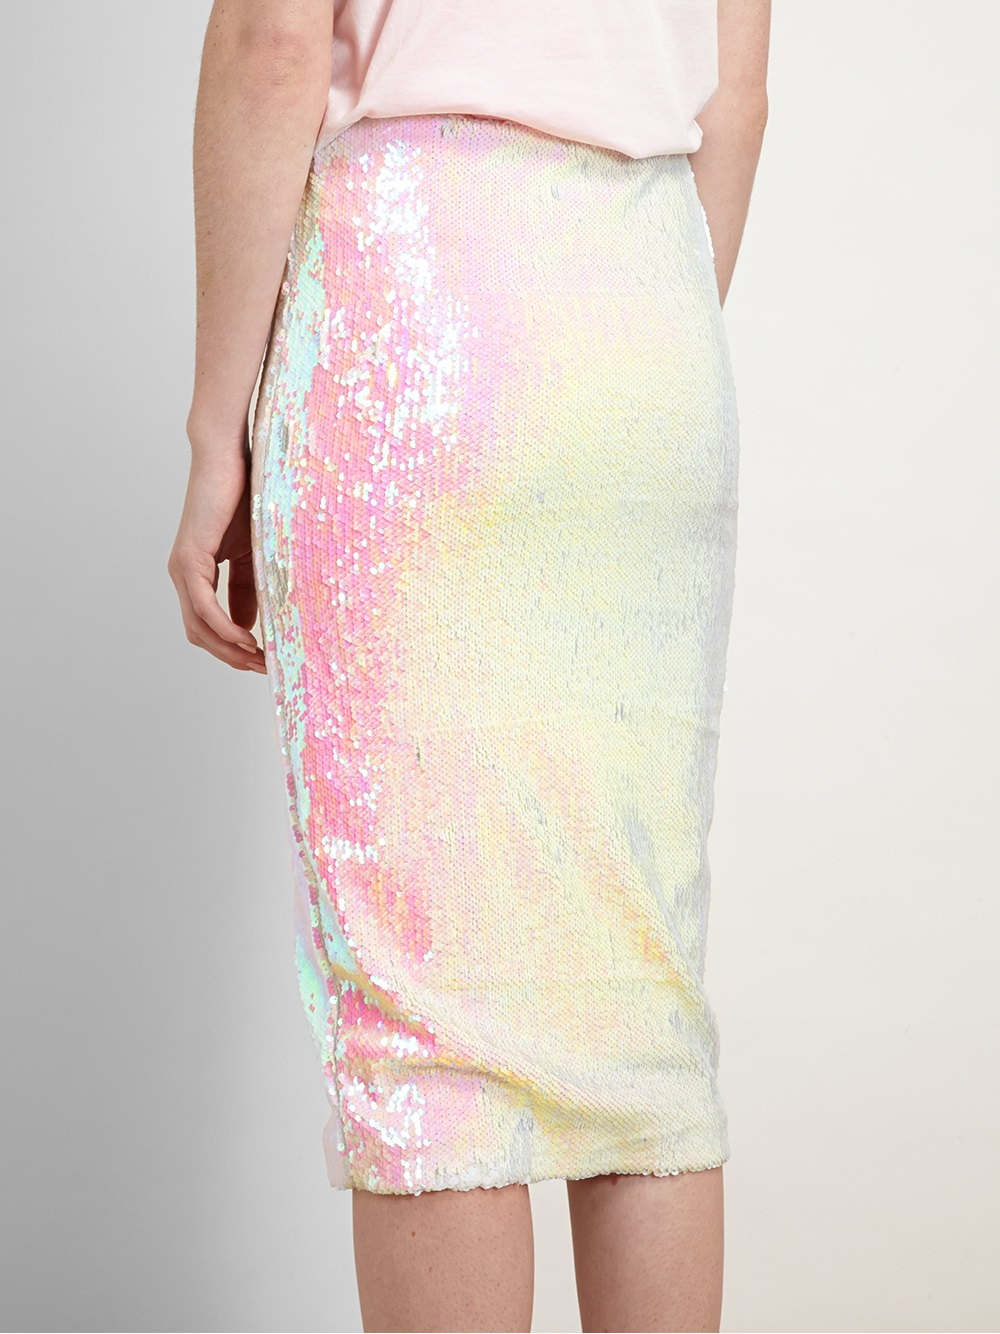 Lyst - Filles A Papa Iridescent Sequin Pencil Skirt in White